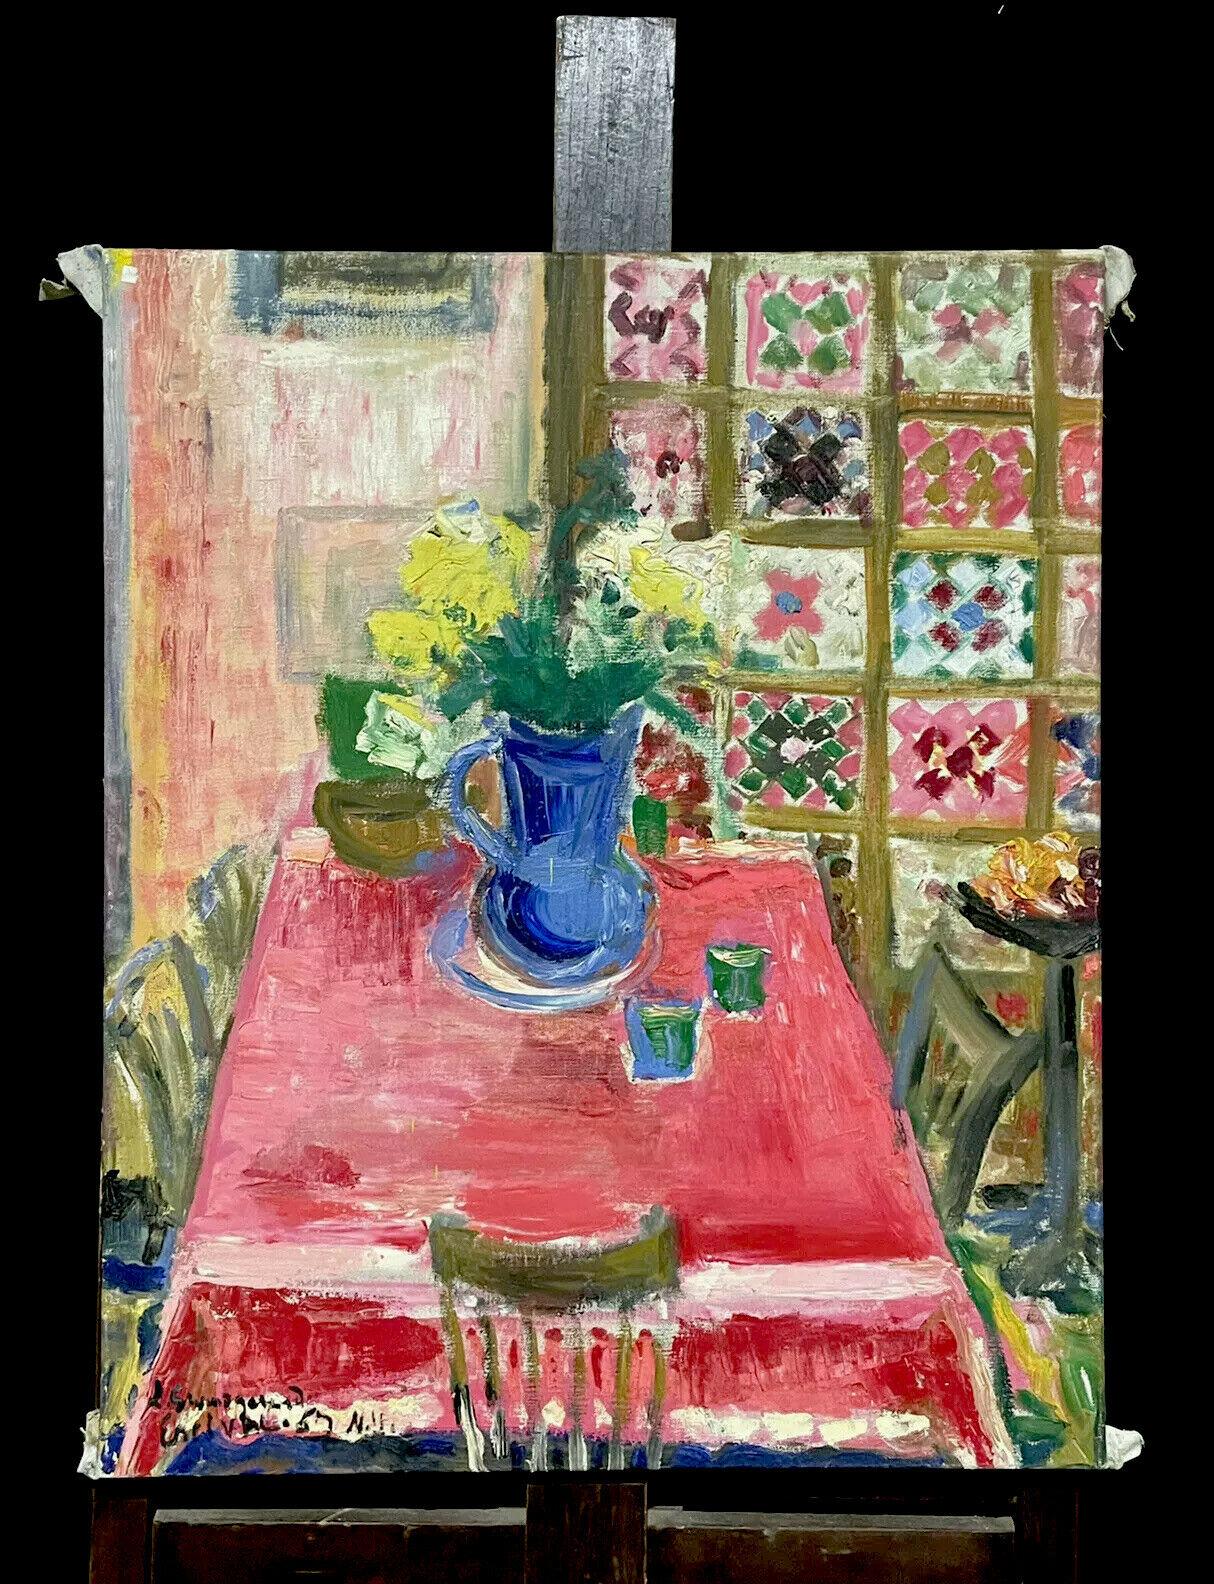 Luci Estival-Grandgerard (1896-1975) Signed French Modernist Oil Pink Interior - Painting by Lucienne Estival - Grandgerard